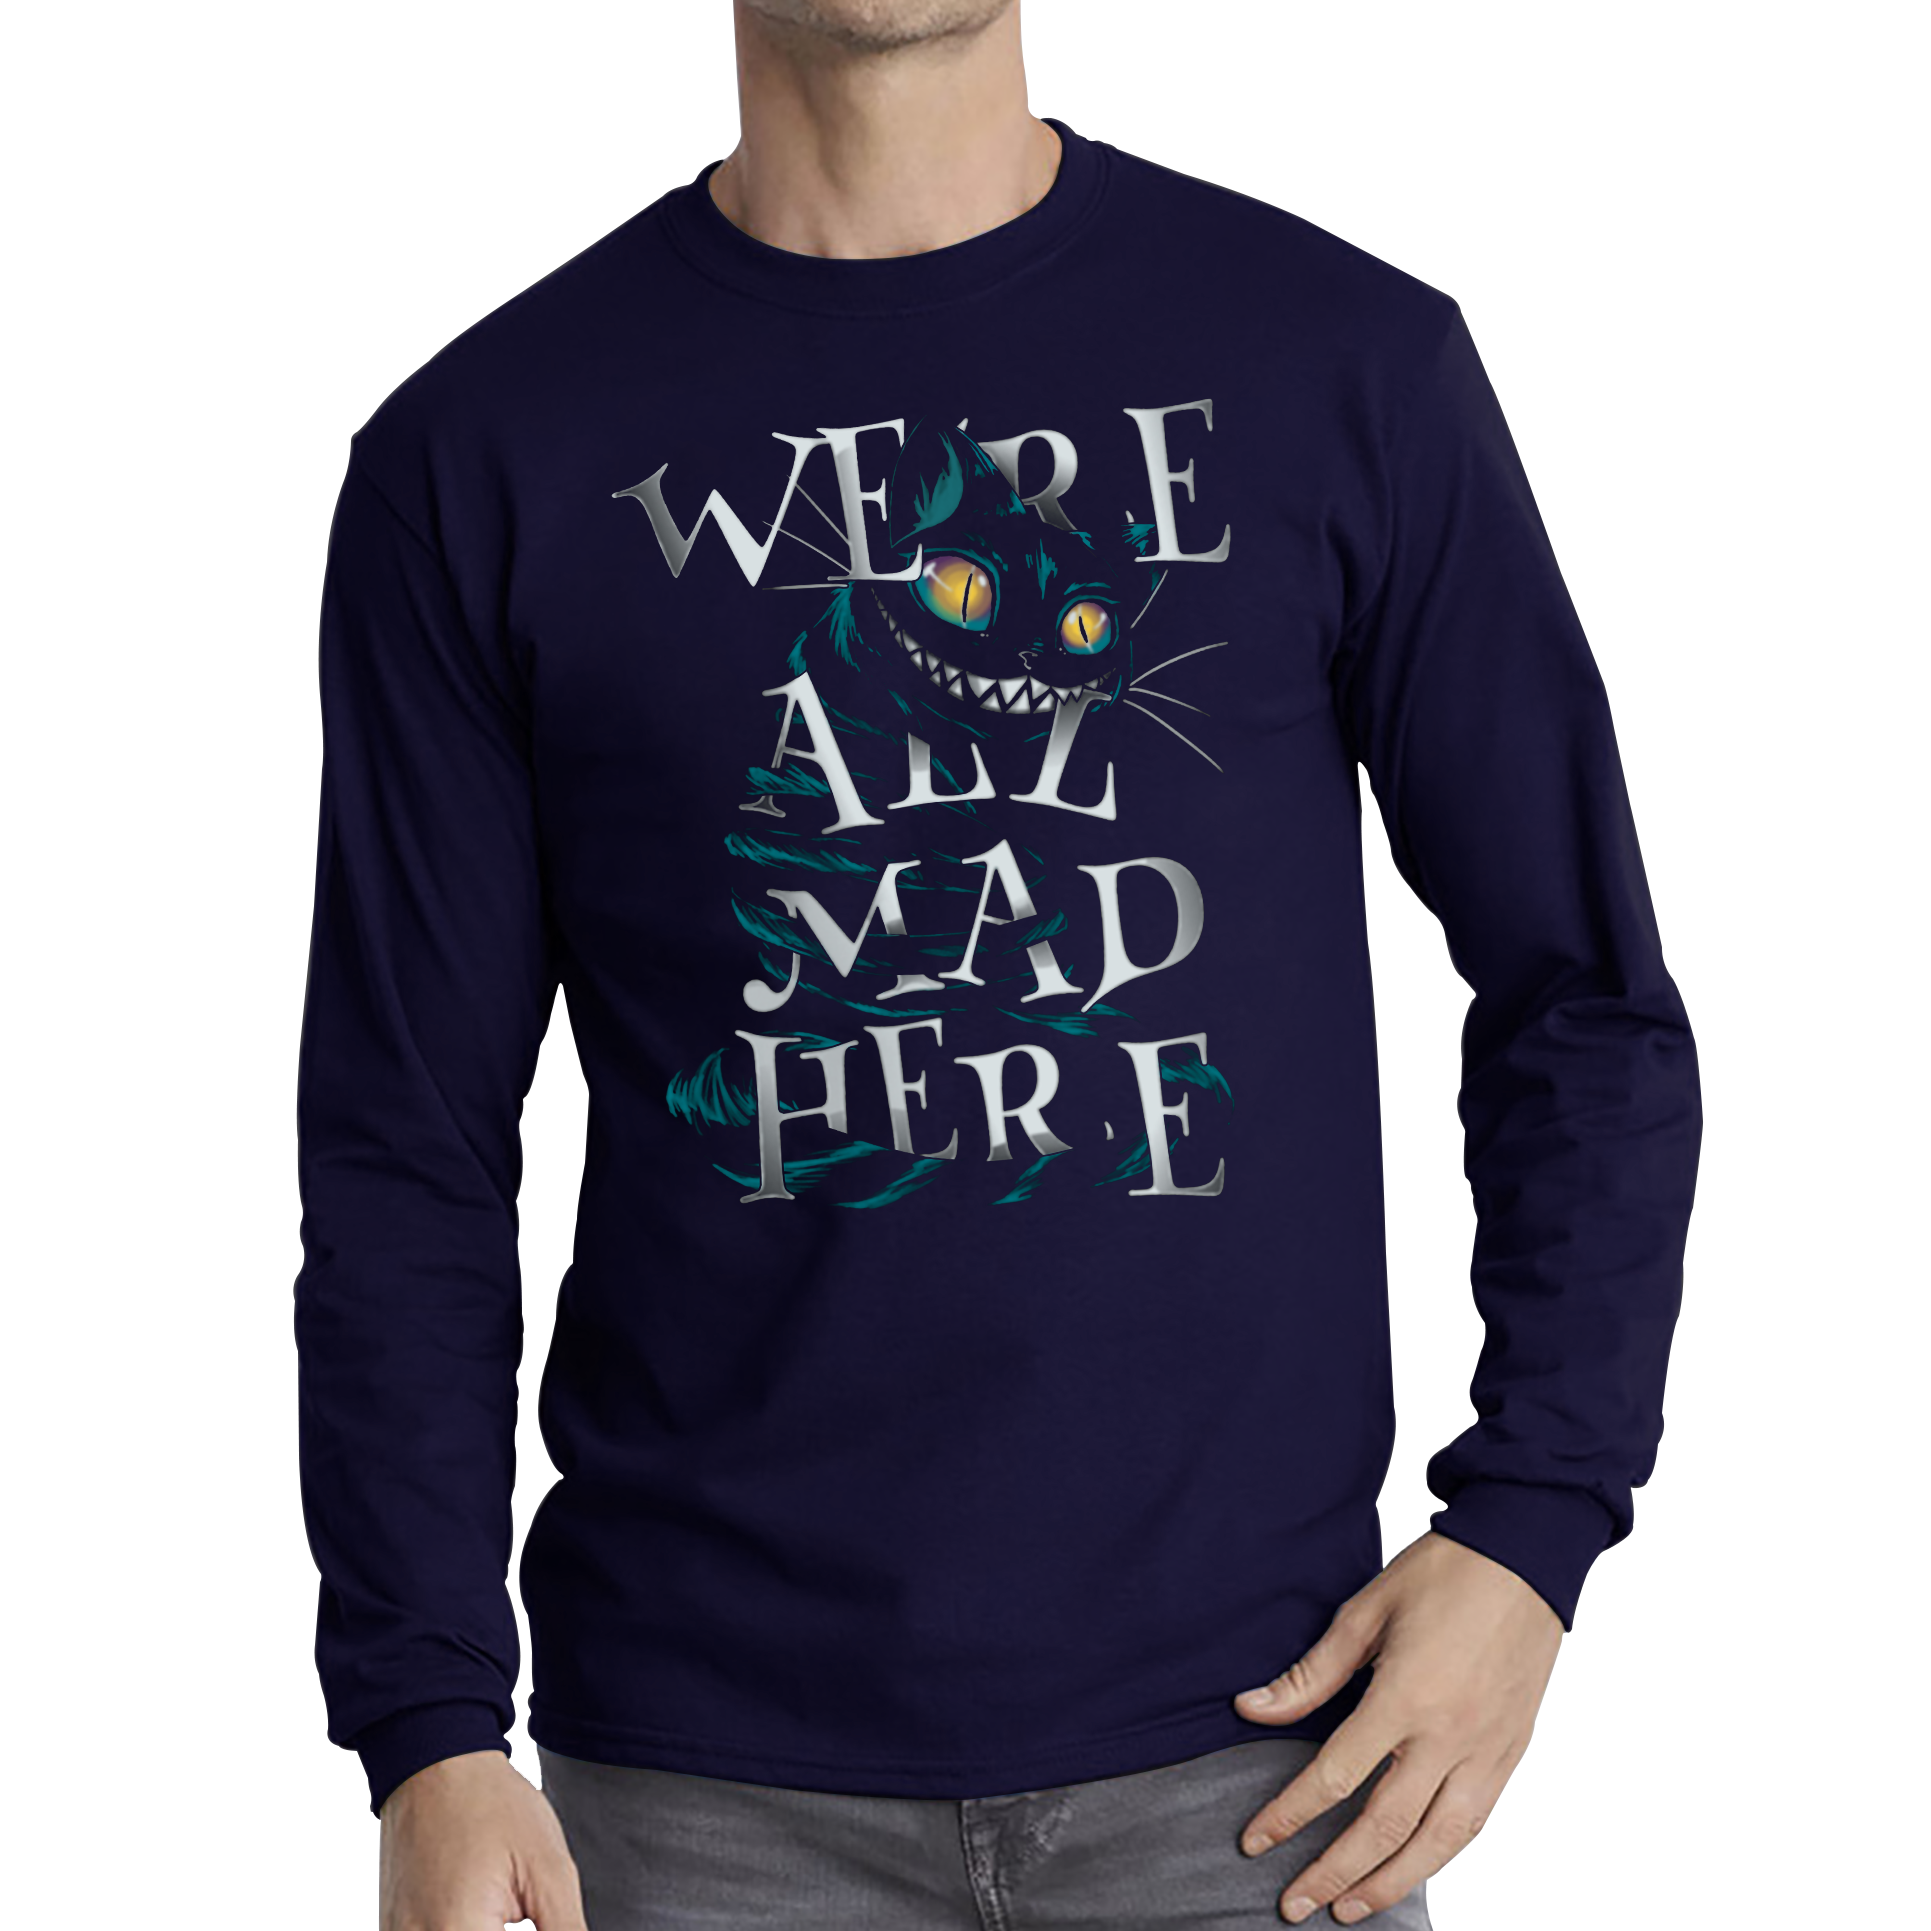 We Are All Mad Here Alice in Wonderland Quote Fantasy Family Film Adult Long Sleeve T Shirt